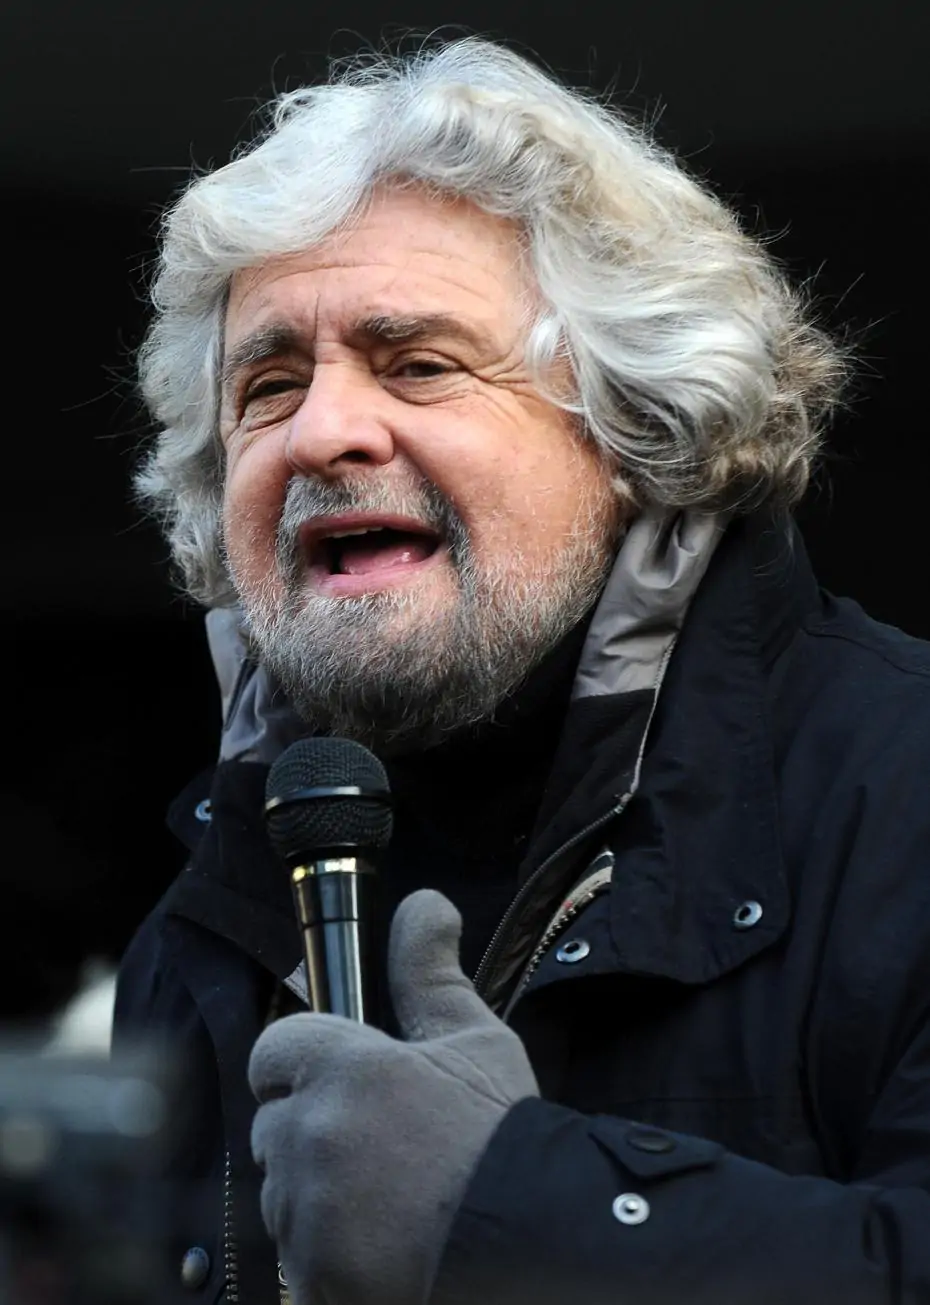 beppe grillo image 5754 article ajust 930